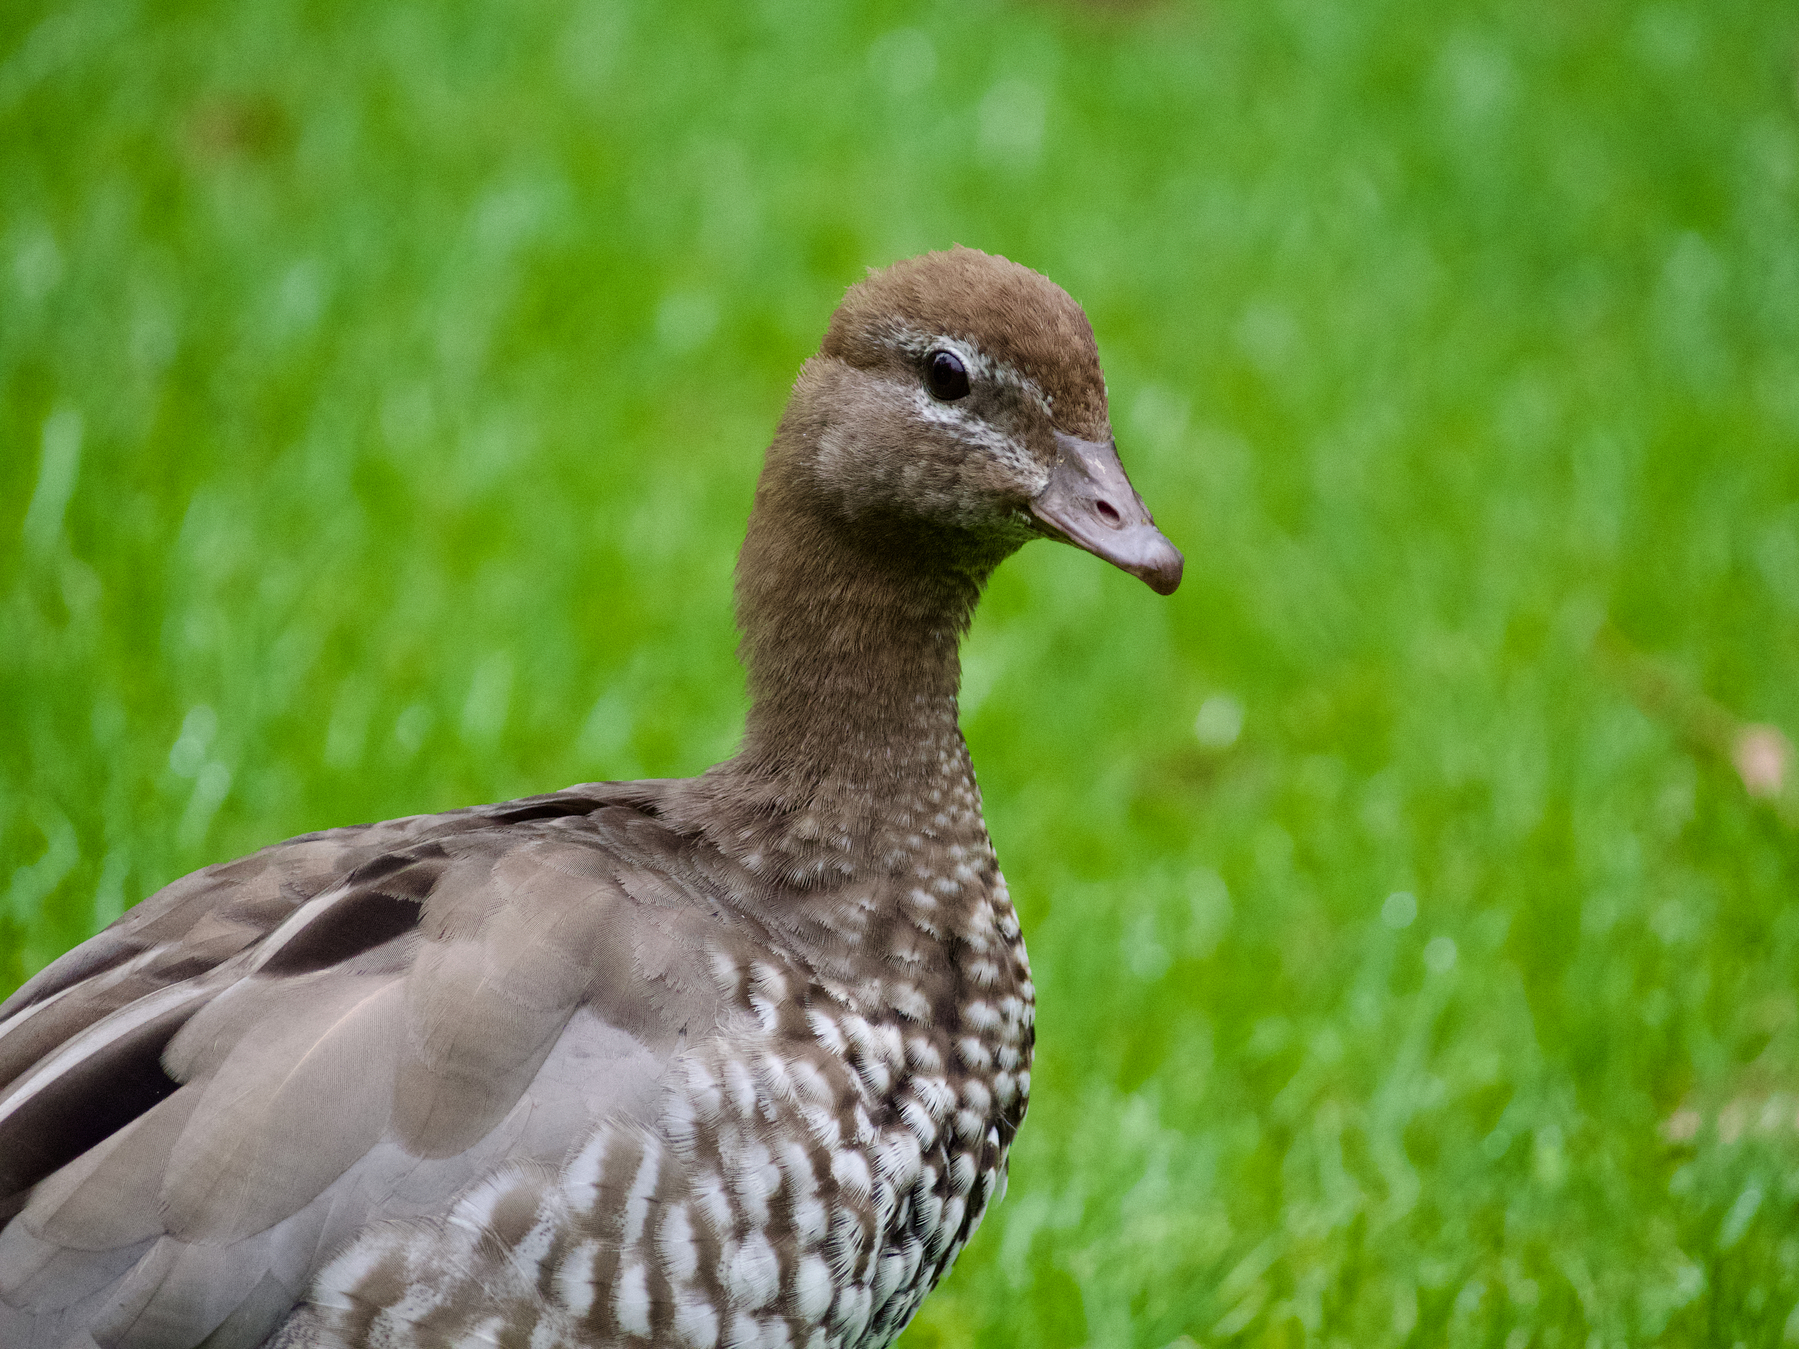 A close-up of a brown duck staring at the camera.